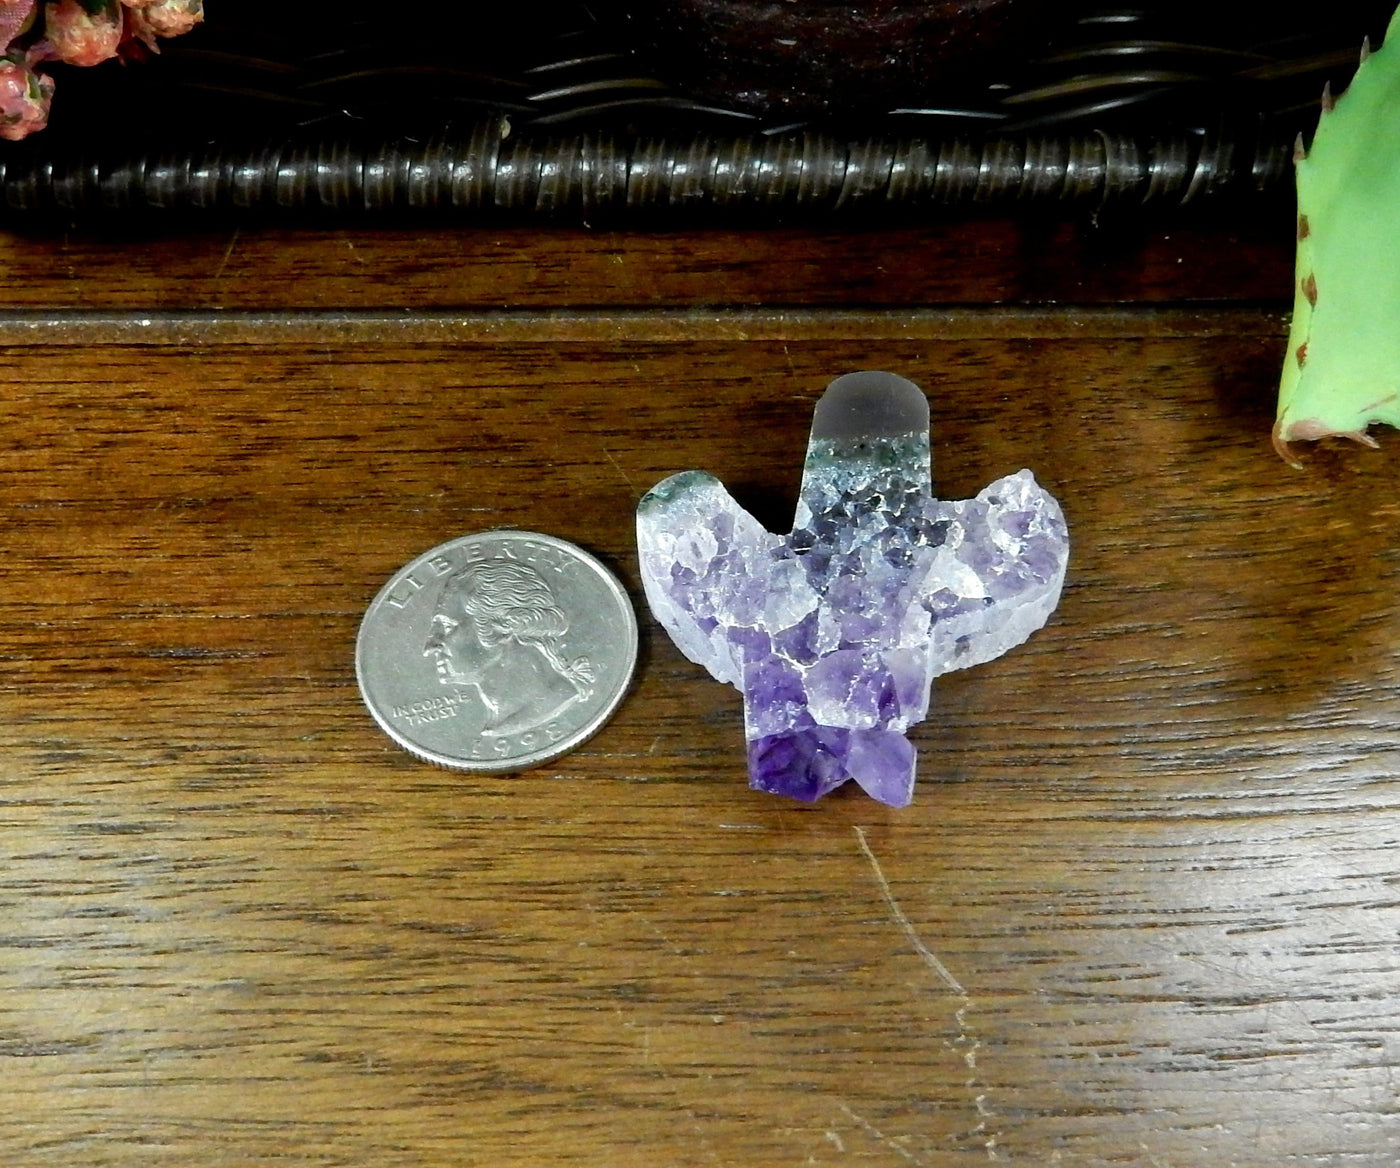 amethyst cactus cabochon next to a quarter for size reference